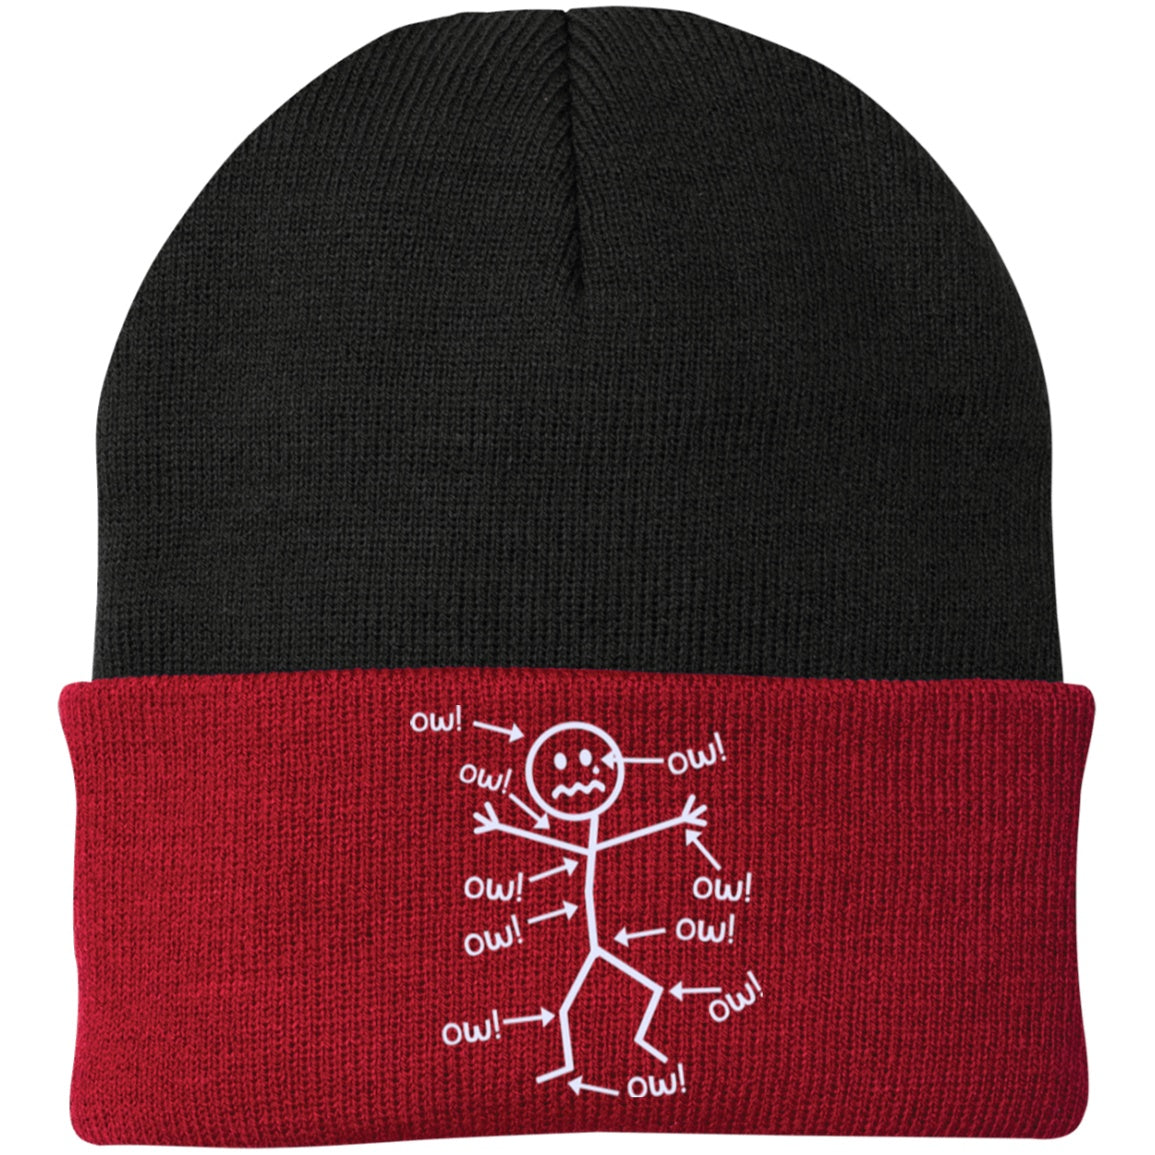 Ow Ow Ow Knit Cap - The Unchargeables